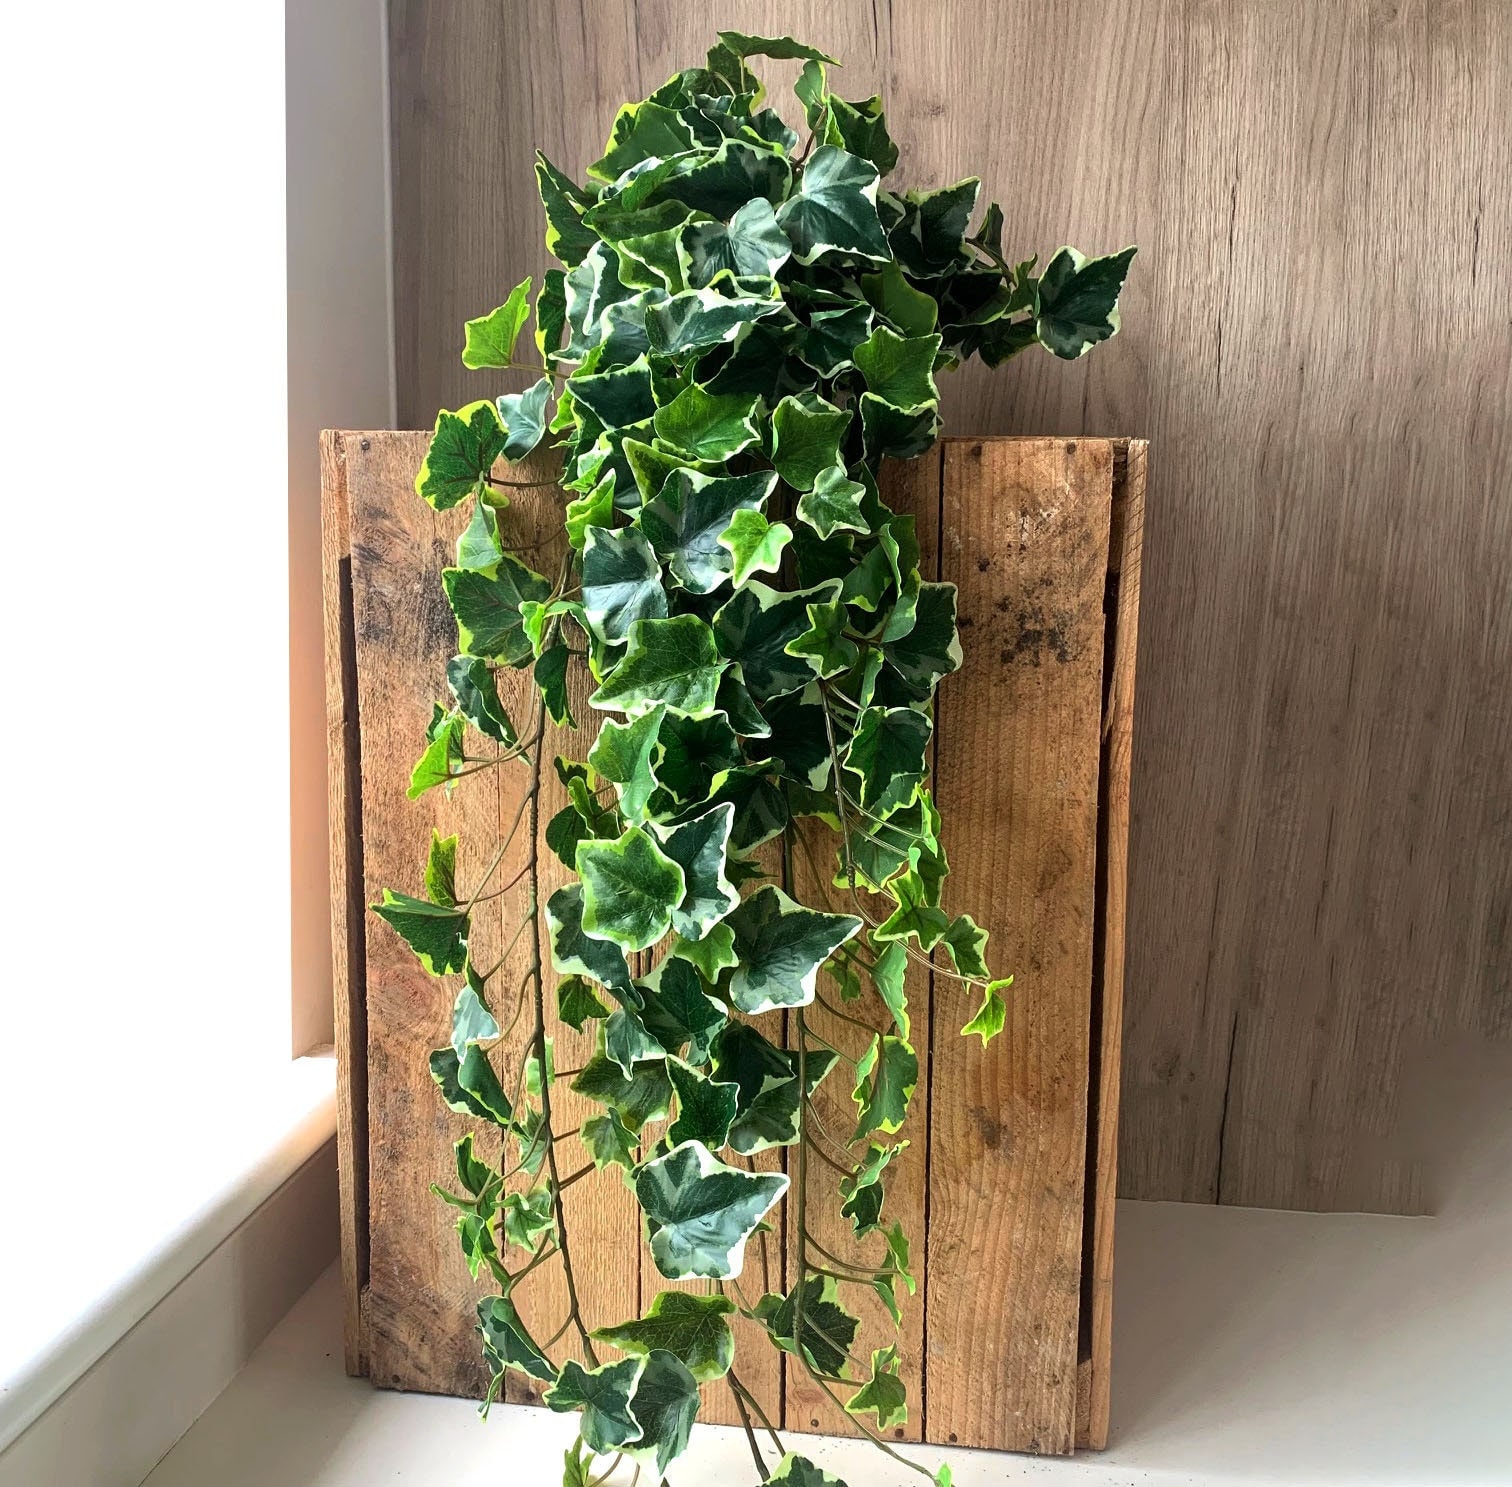 Yirtree Small Fake Hanging Plant, Artificial Potted Plant Faux Ivy Vine Plant Hanging Plant Pothos for Shelf Home Office Indoor Outdoor Garden